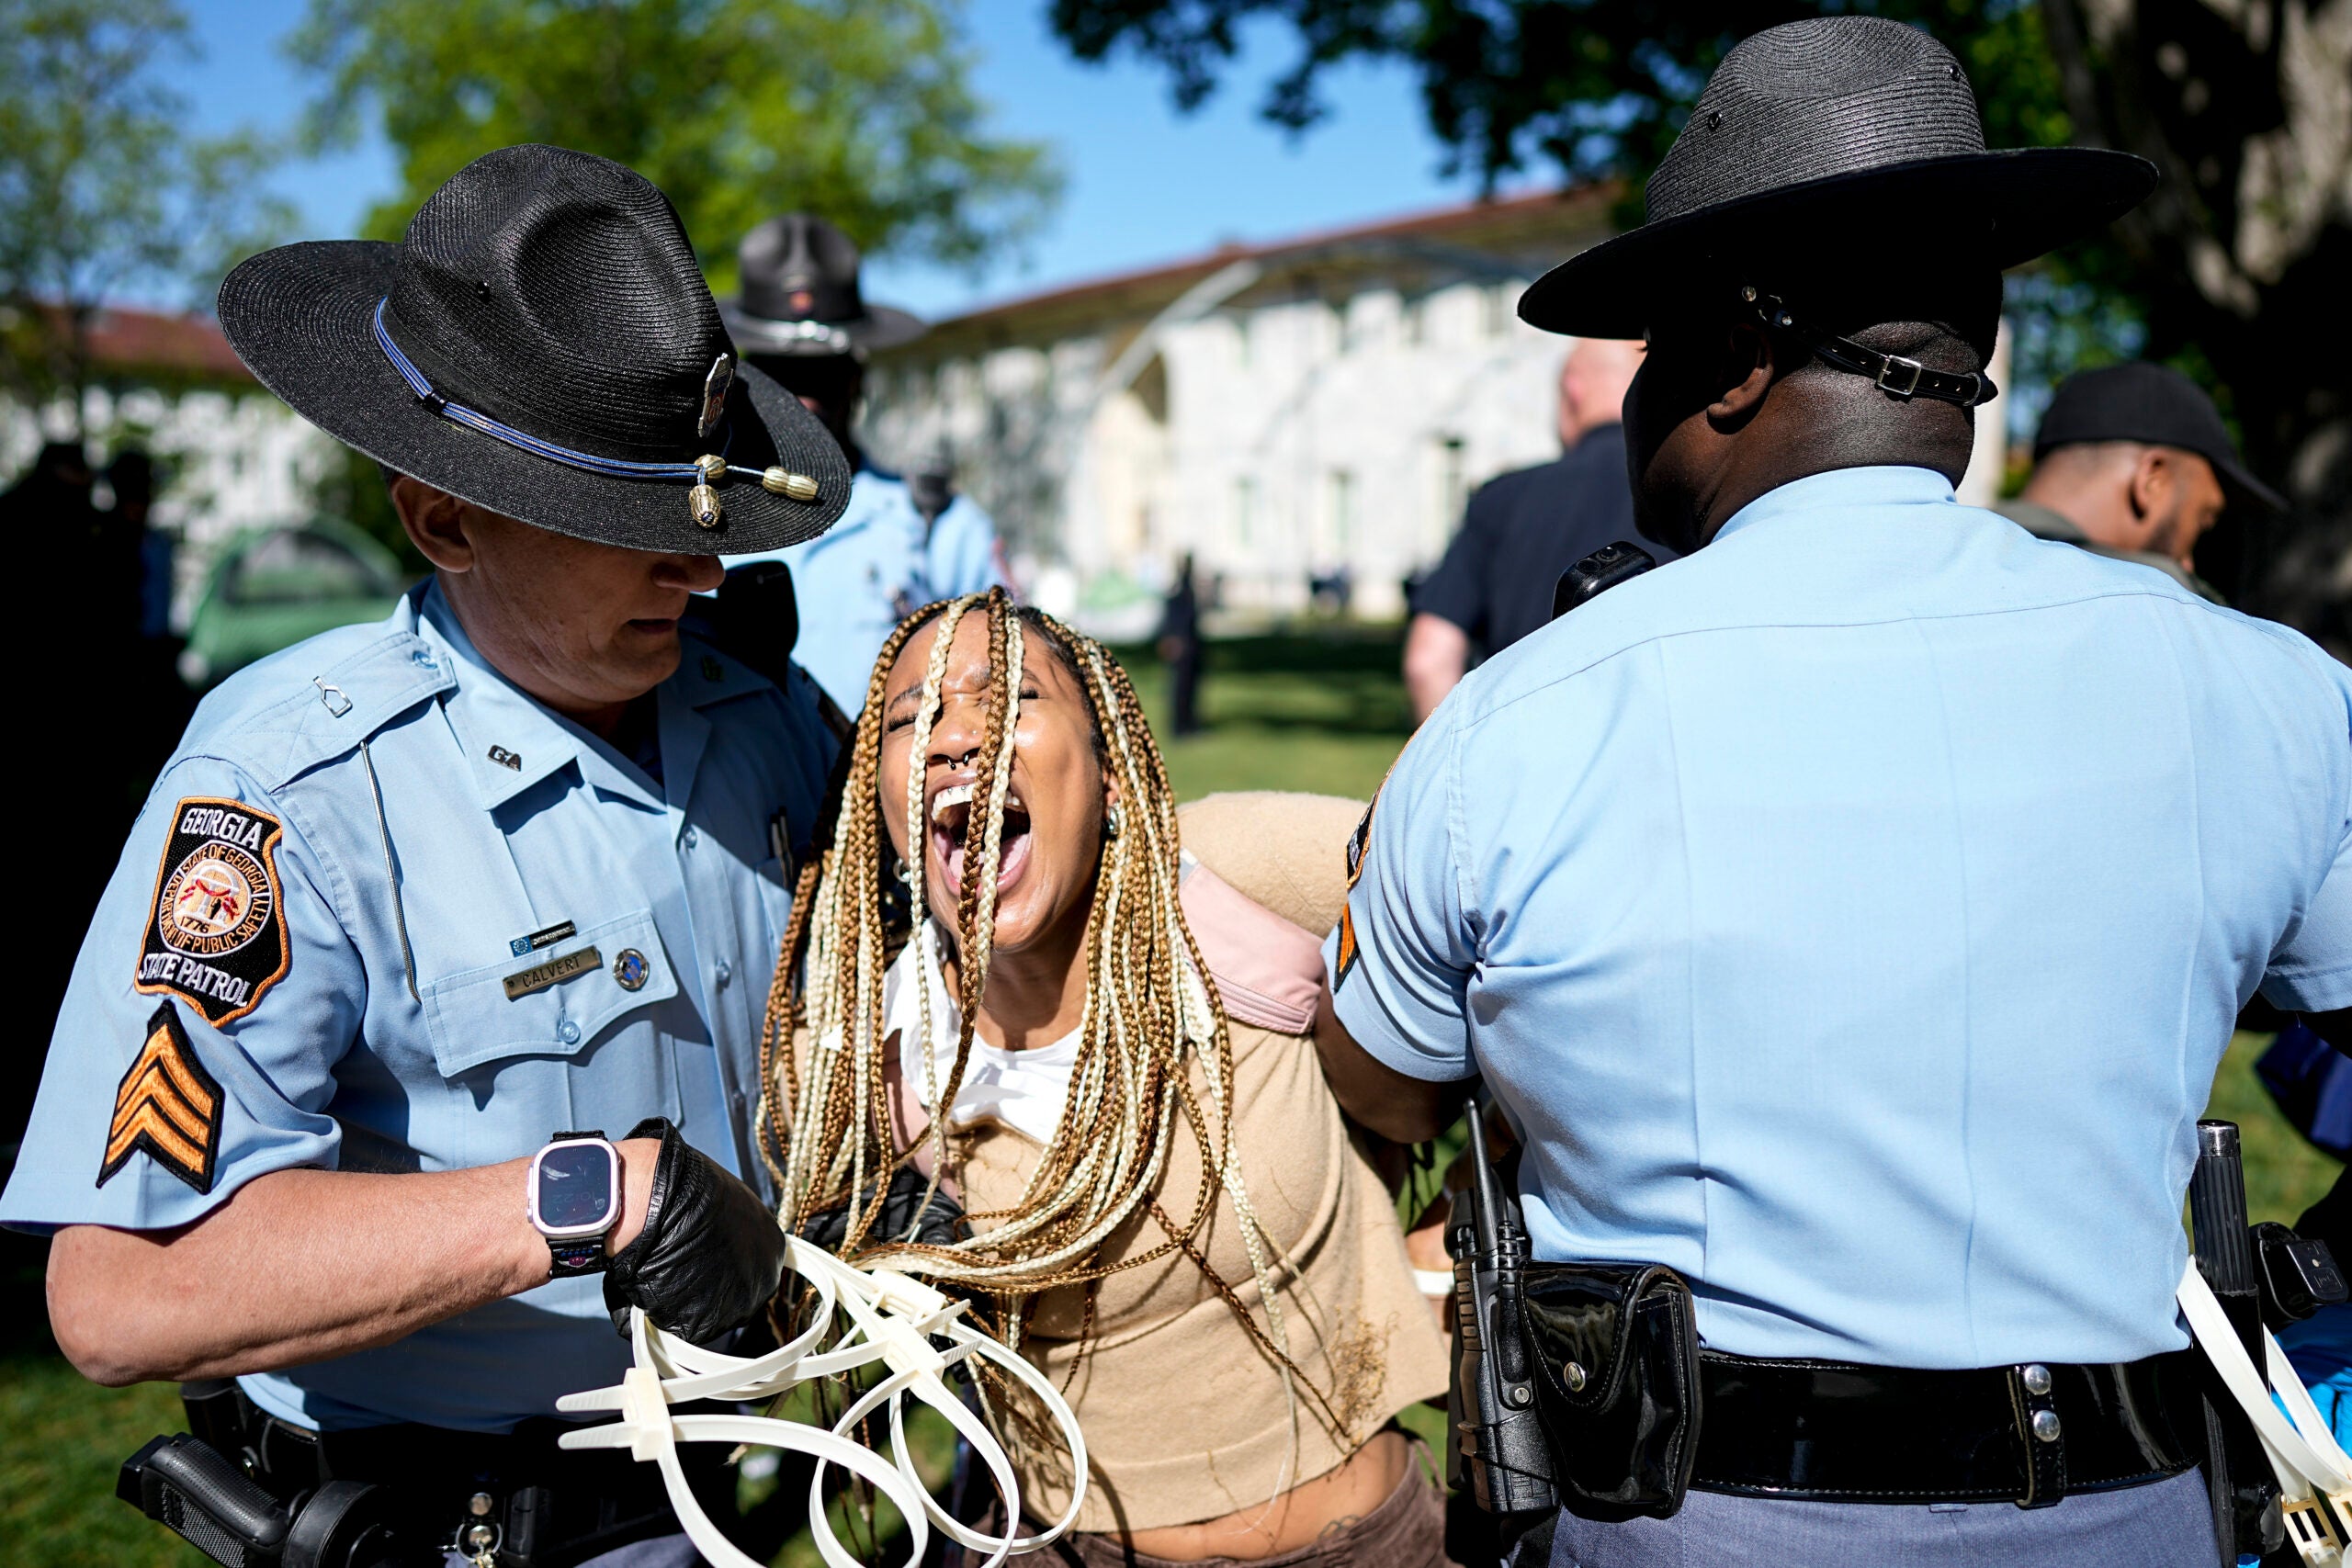 Georgia State Patrol officers arrest a protester on the Emory University campus.